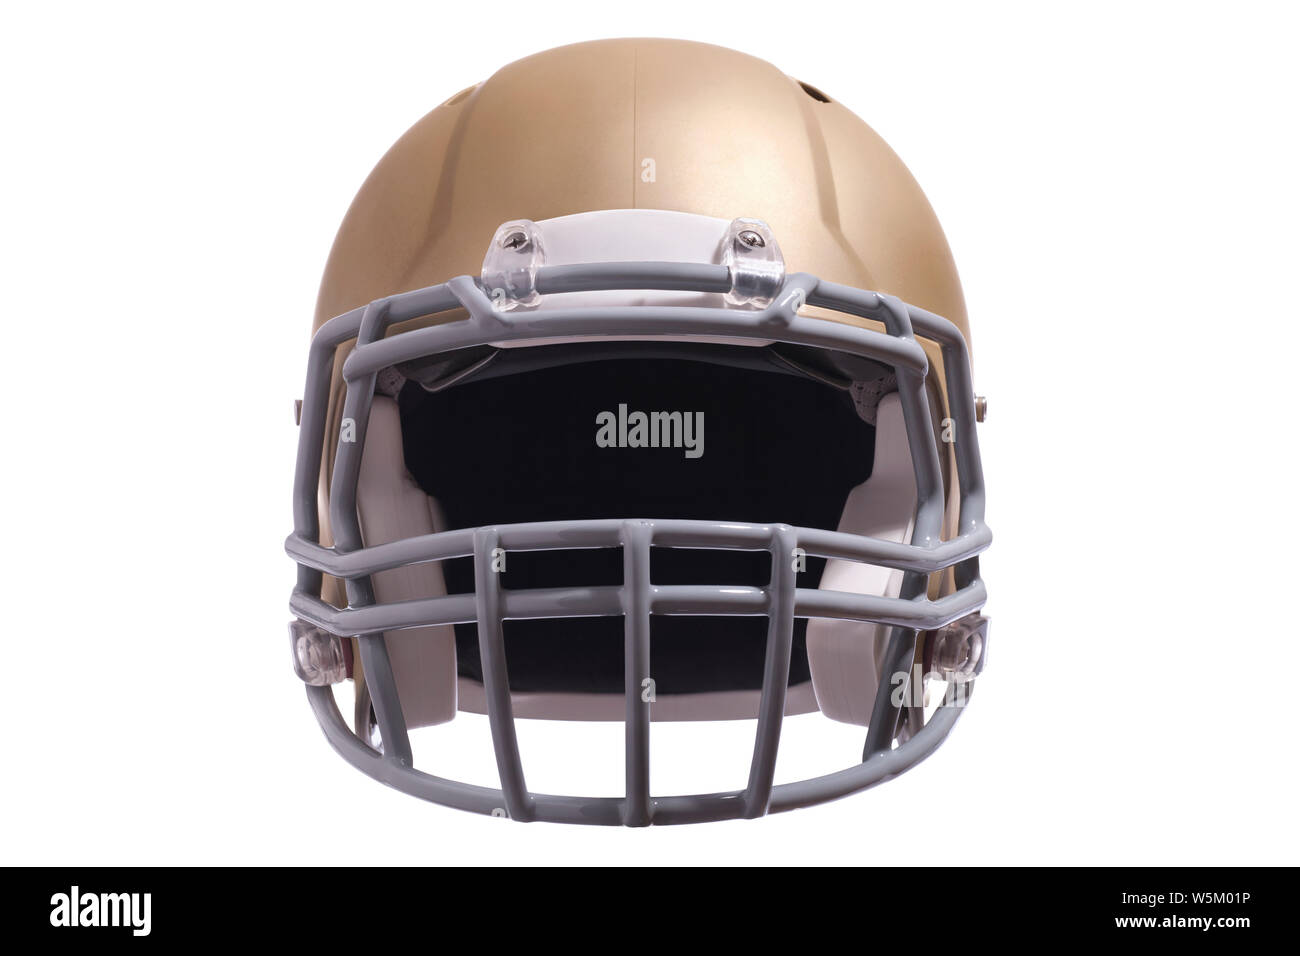 A gold colored modern football helmet front view isolated on white background Stock Photo